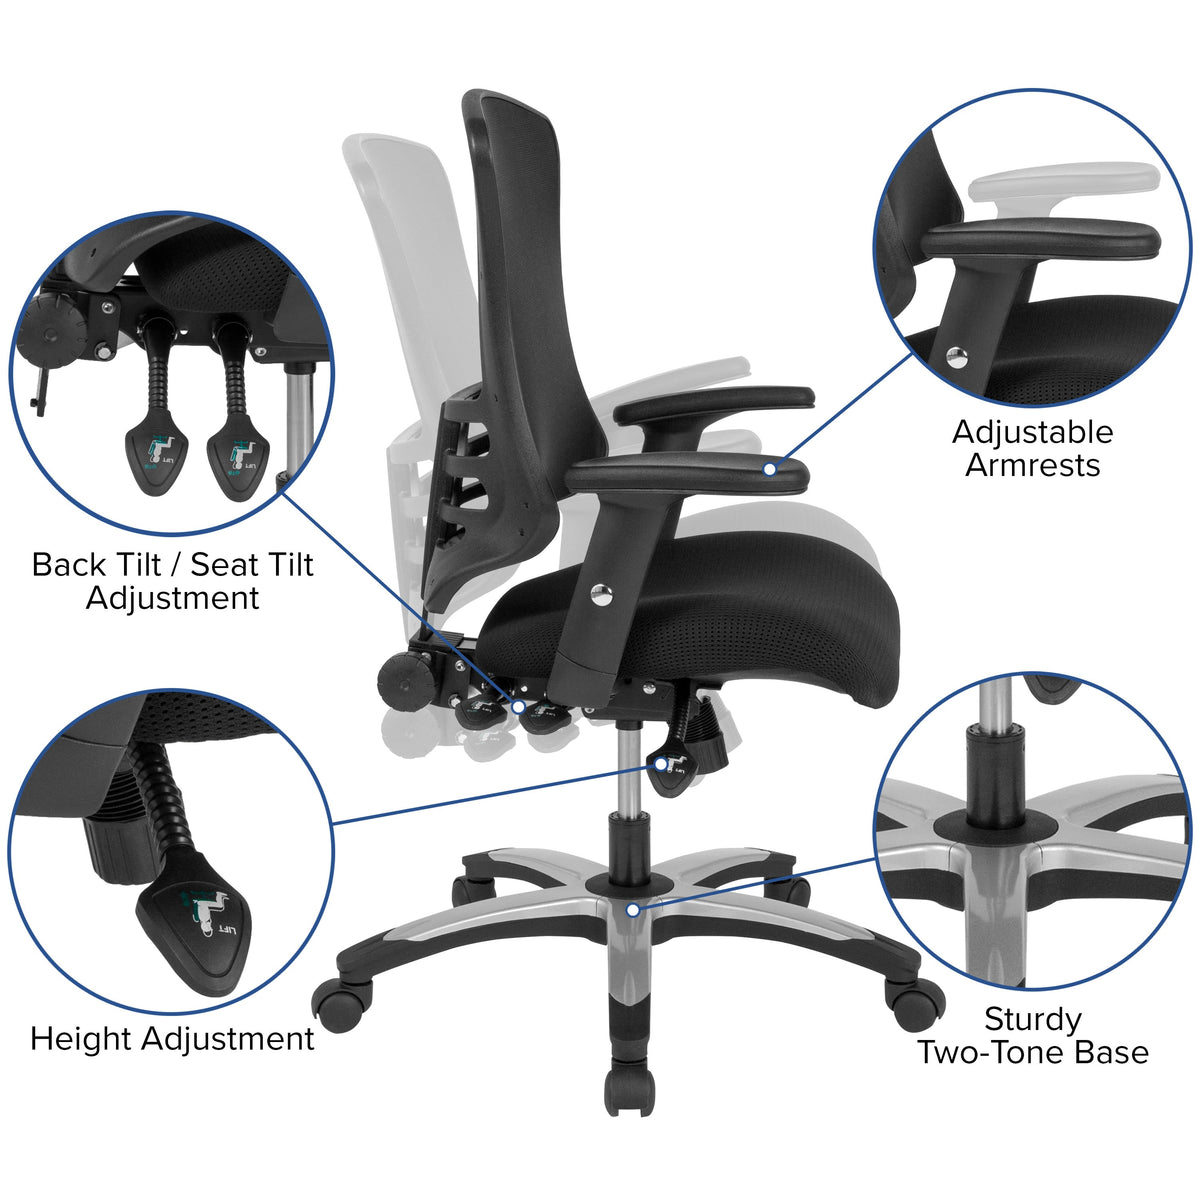 High Back Black Mesh Multifunction Ergonomic Swivel Chair with Adjustable Arms